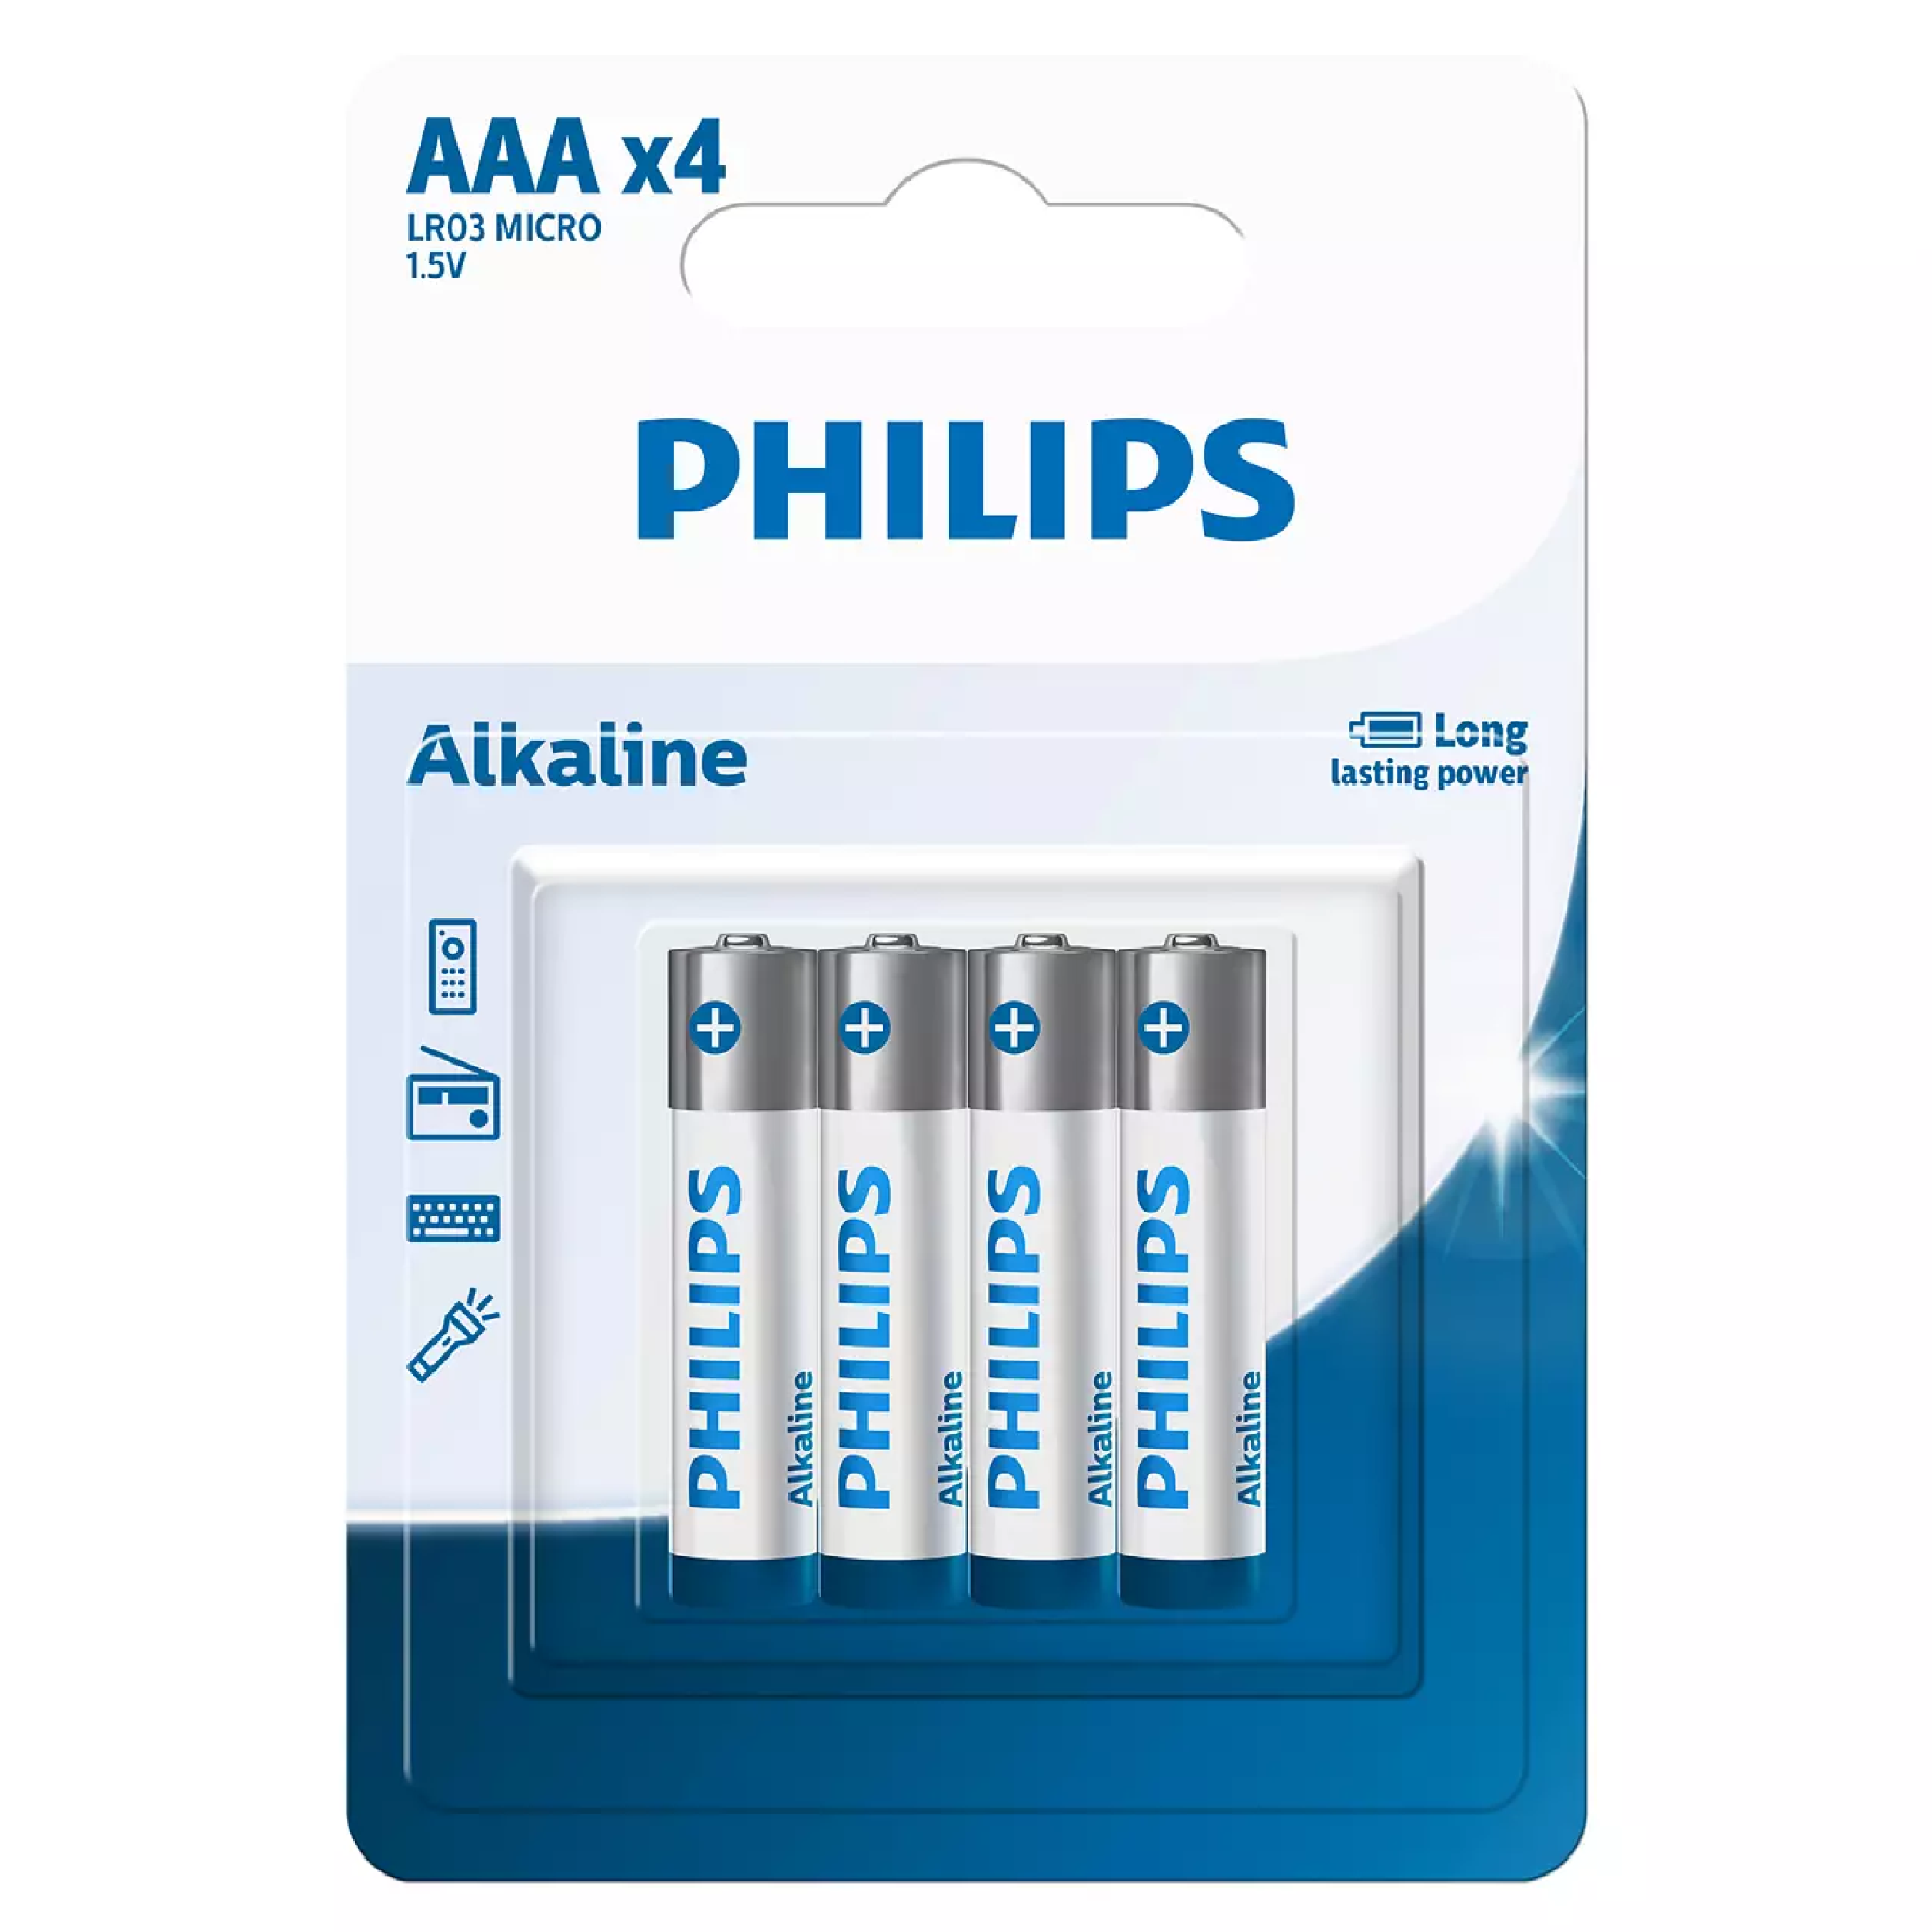 Philips ALKALINE 4 X AAA Entry Battery 4PC/PACK